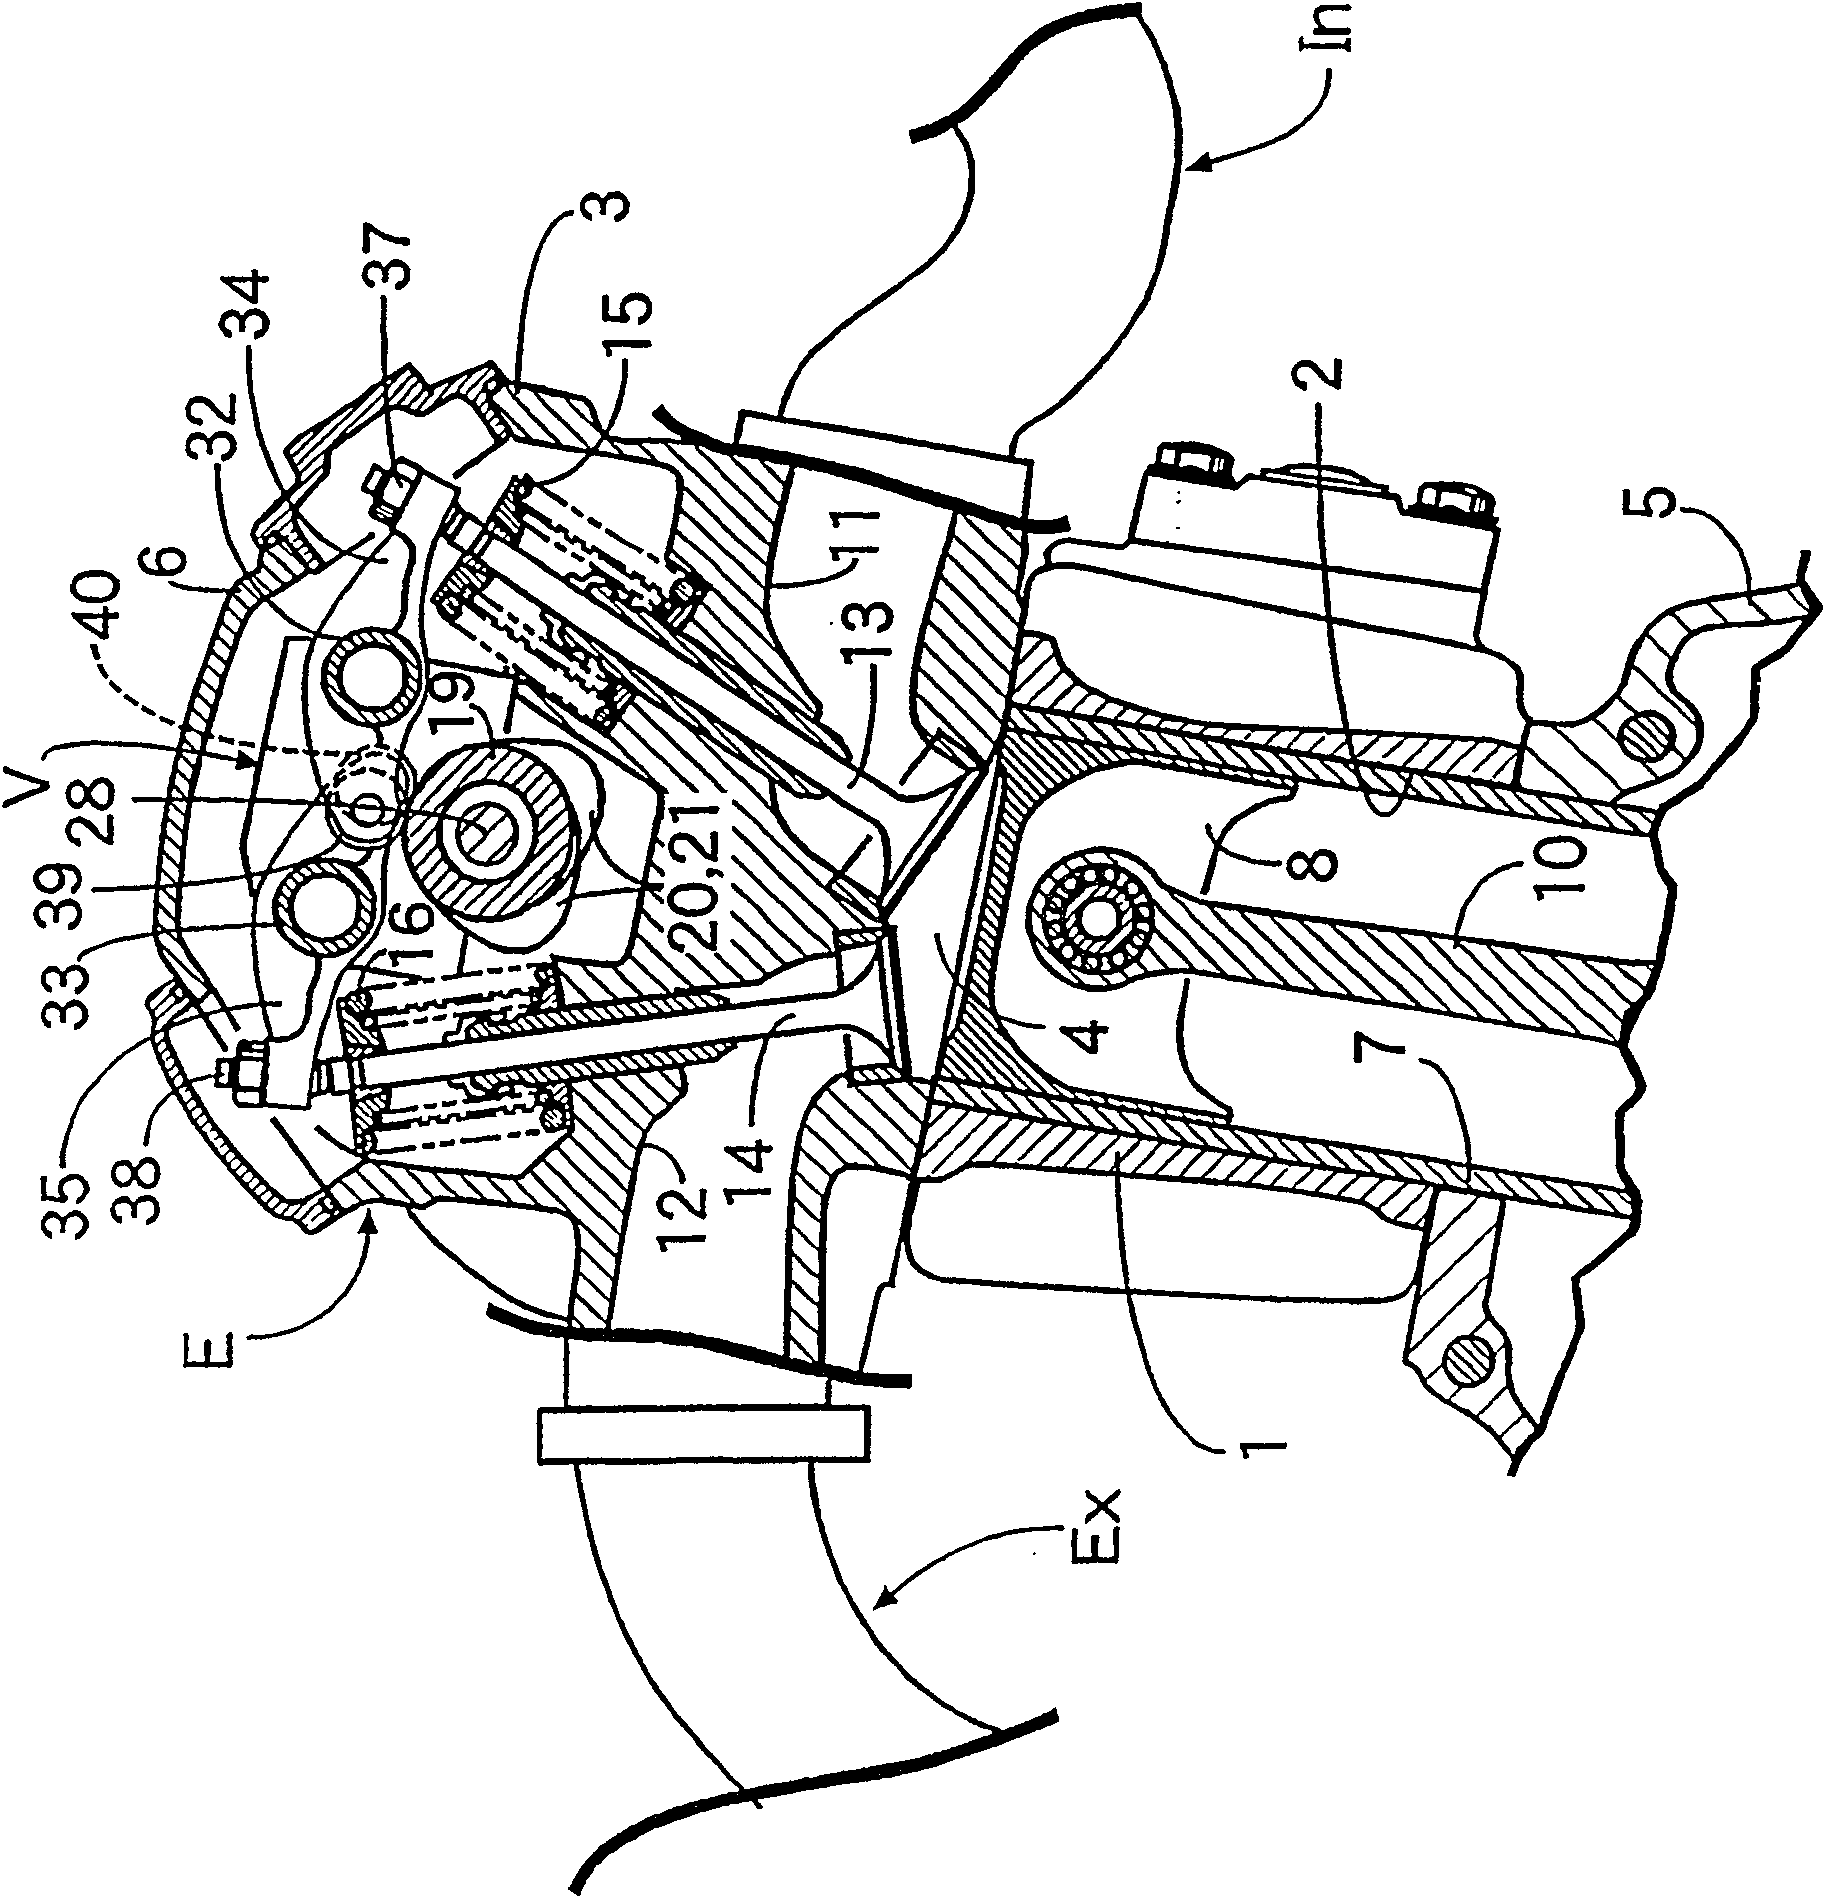 Whirl-stop device for rocker arm shaft in valve mechanism of internal combustion engine